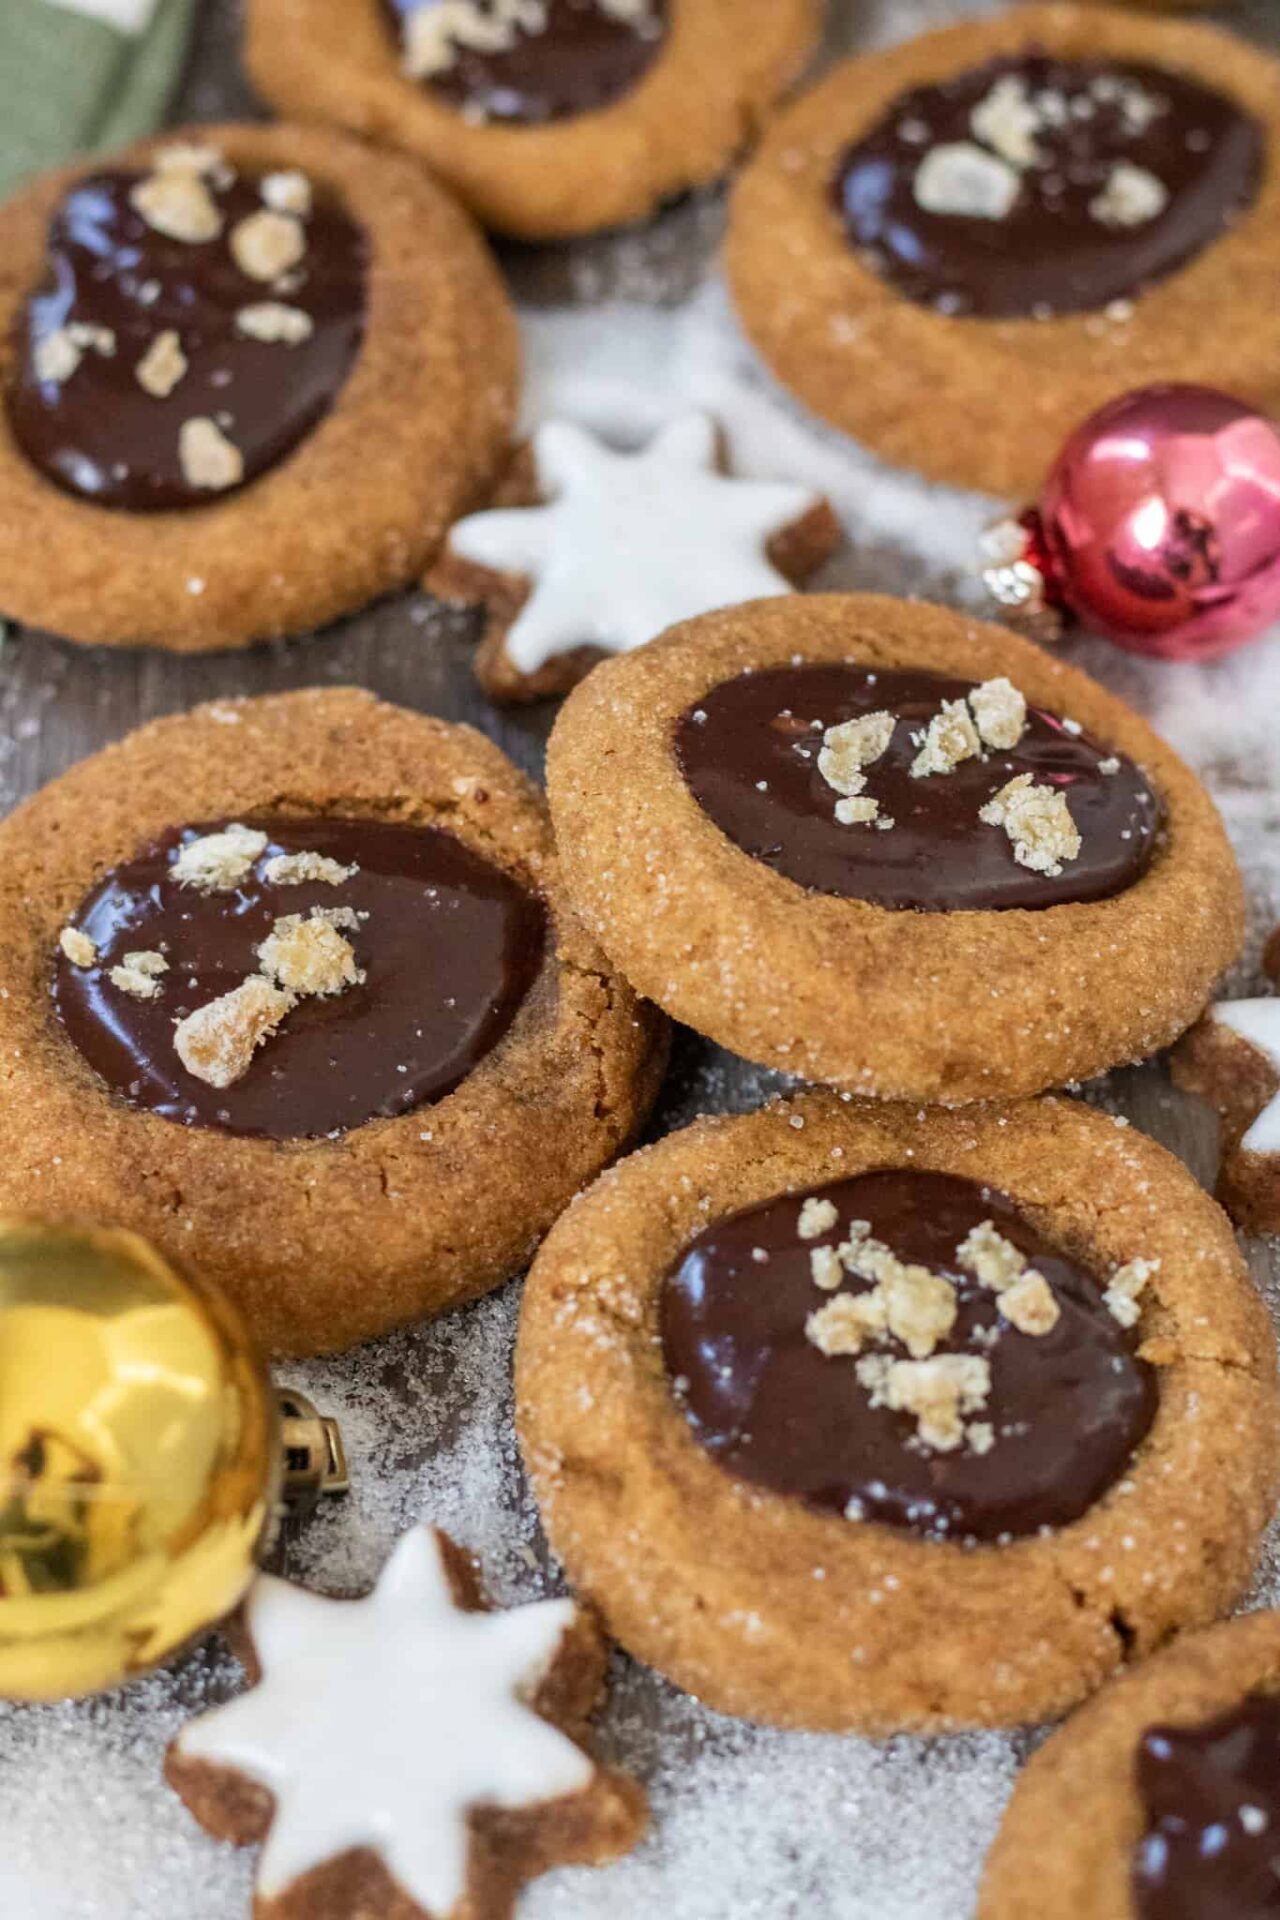 Gingerbread thumbprint cookies that are filled with chocolate ganache and topped with candied ginger pieces.  There's a small gold ornament and sugar in the background that looks like snow.